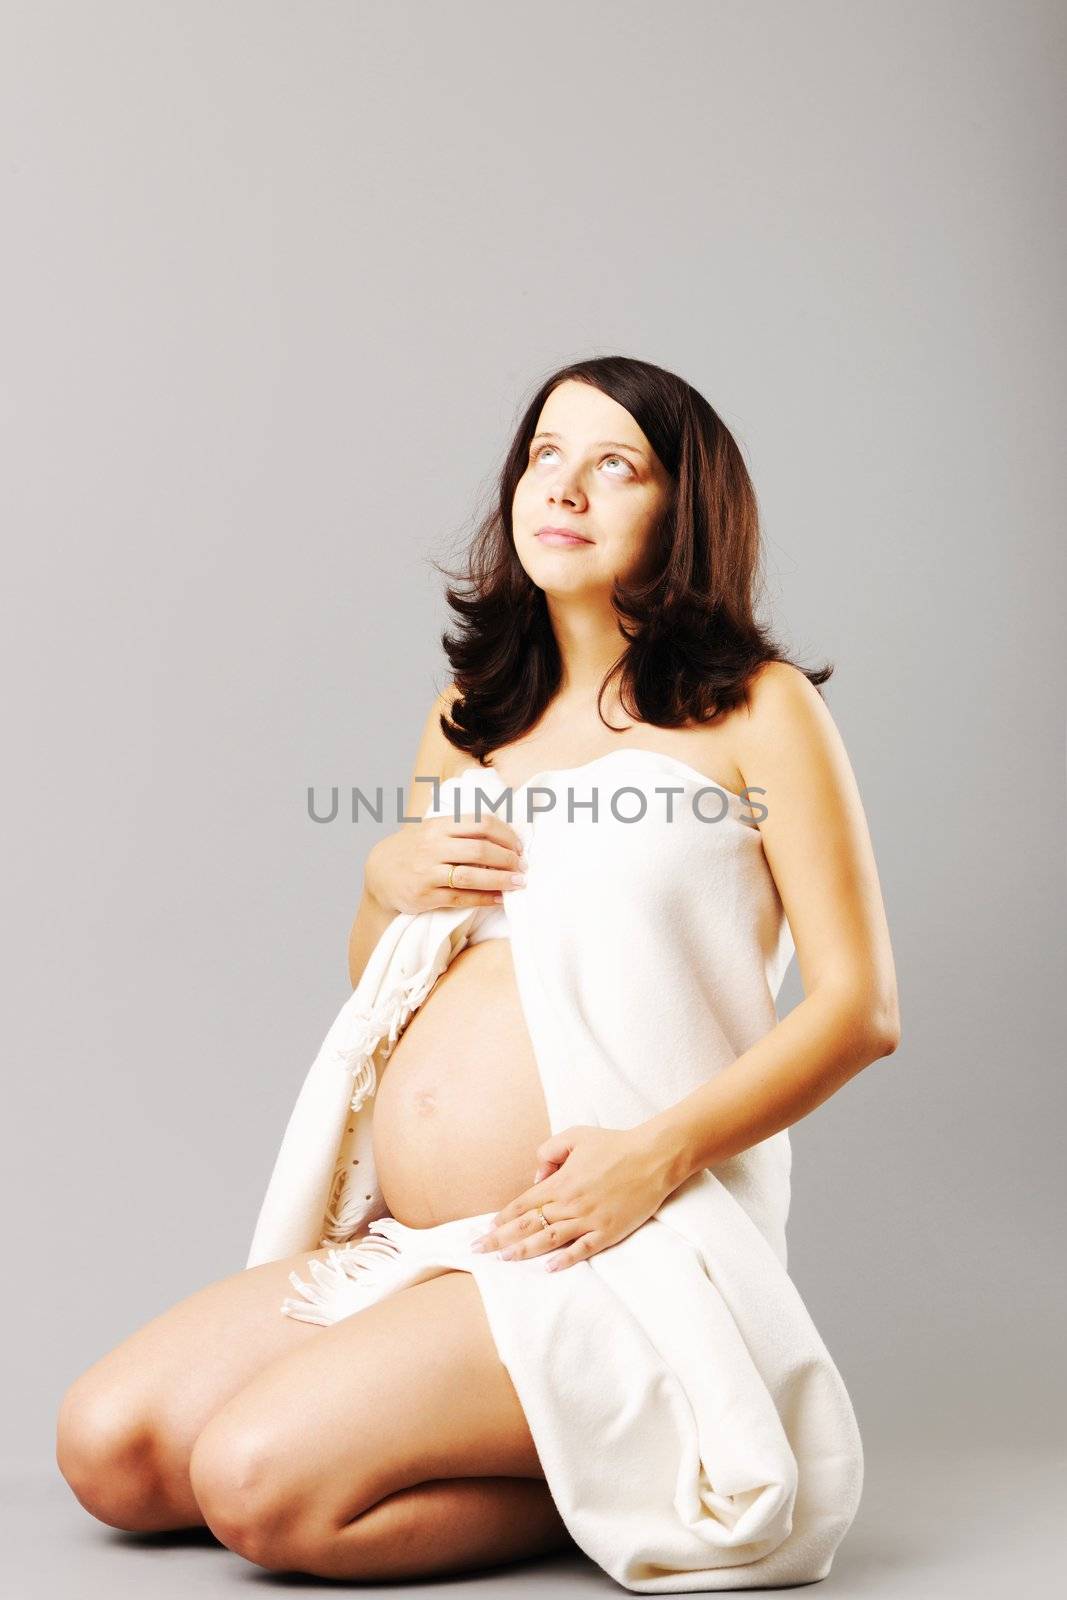 Pregnant woman by haveseen